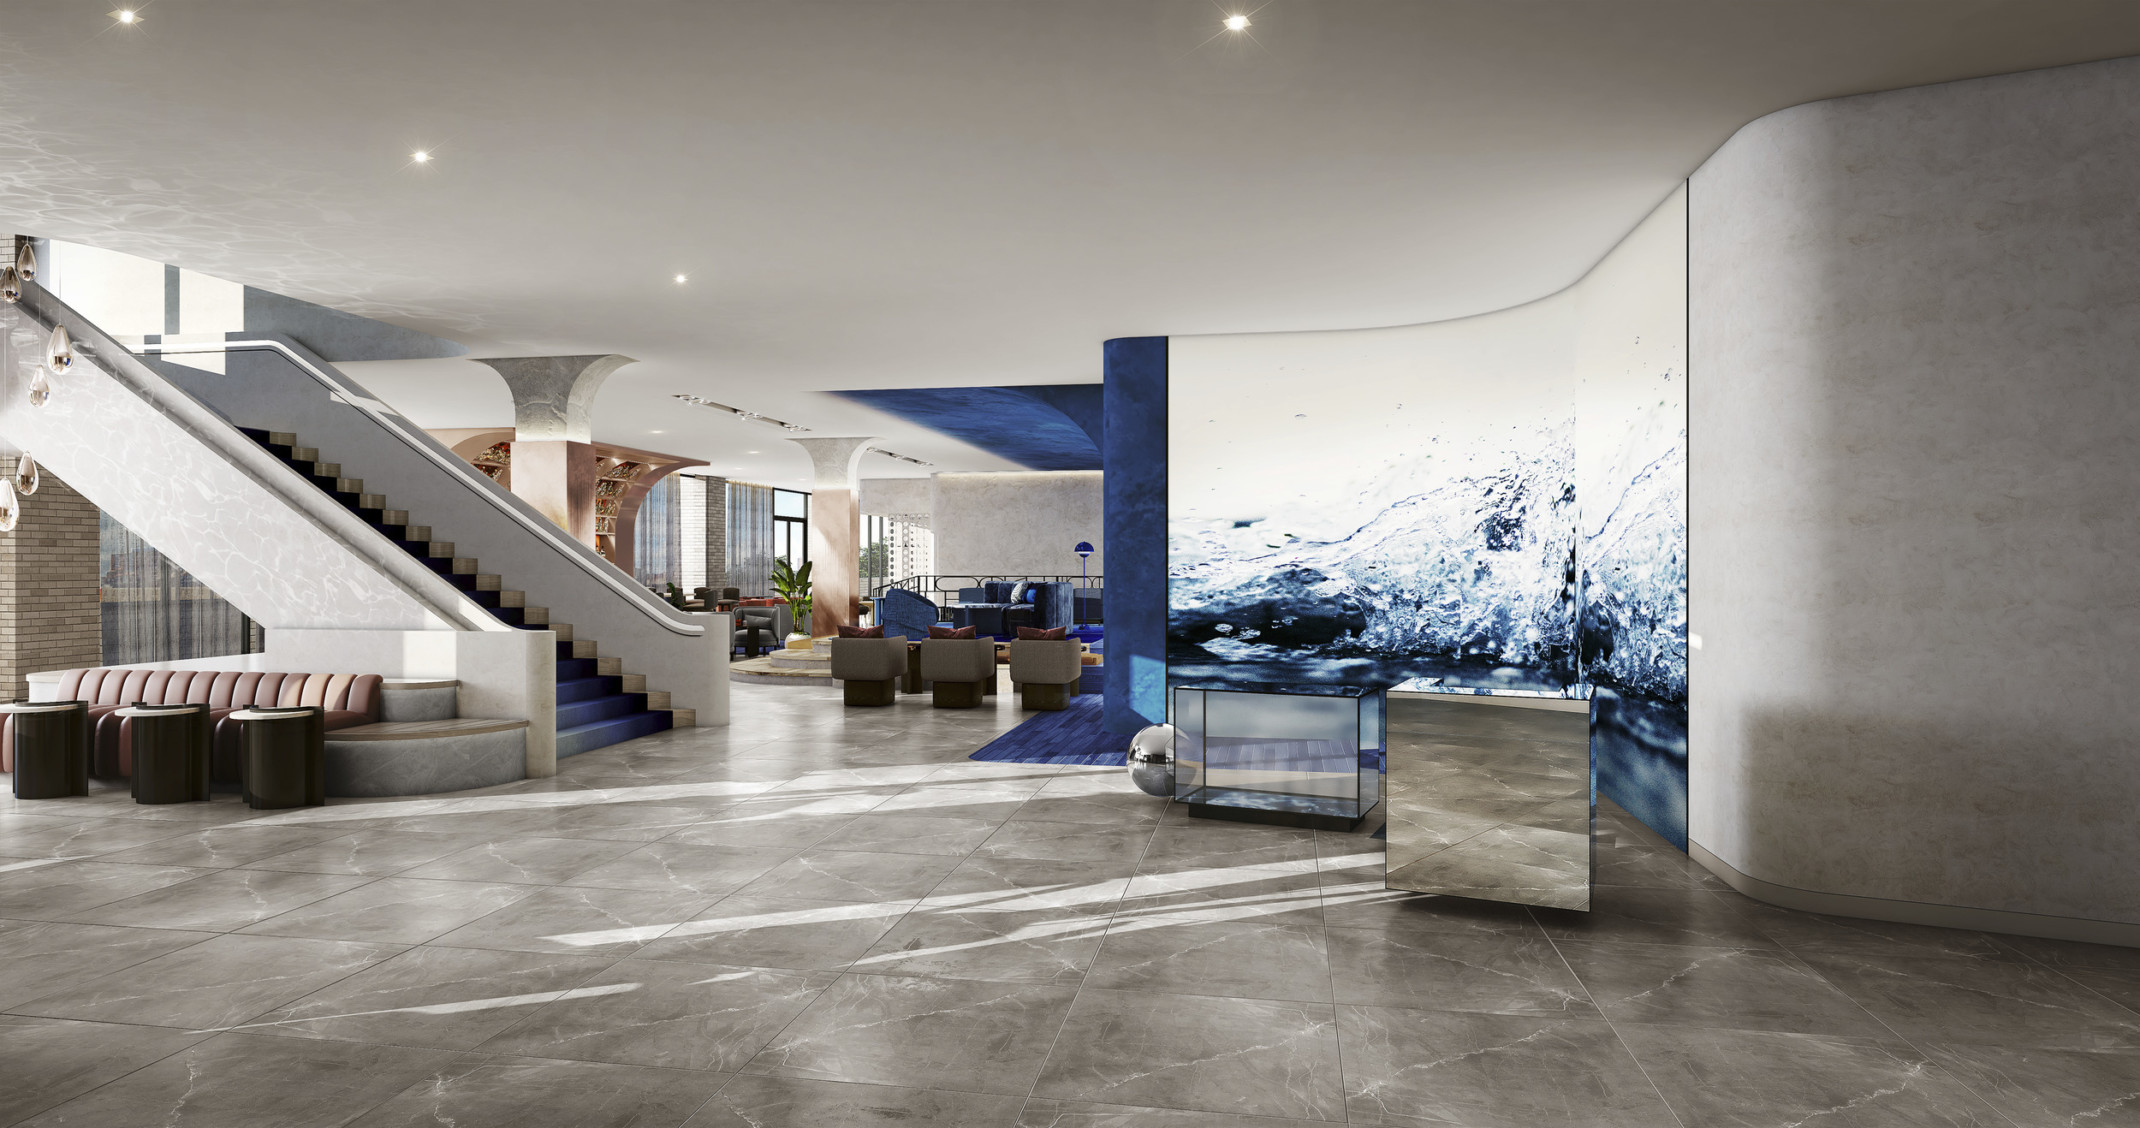 hotel lobby with abstracted water mural and blue and white sculptural walls and columns